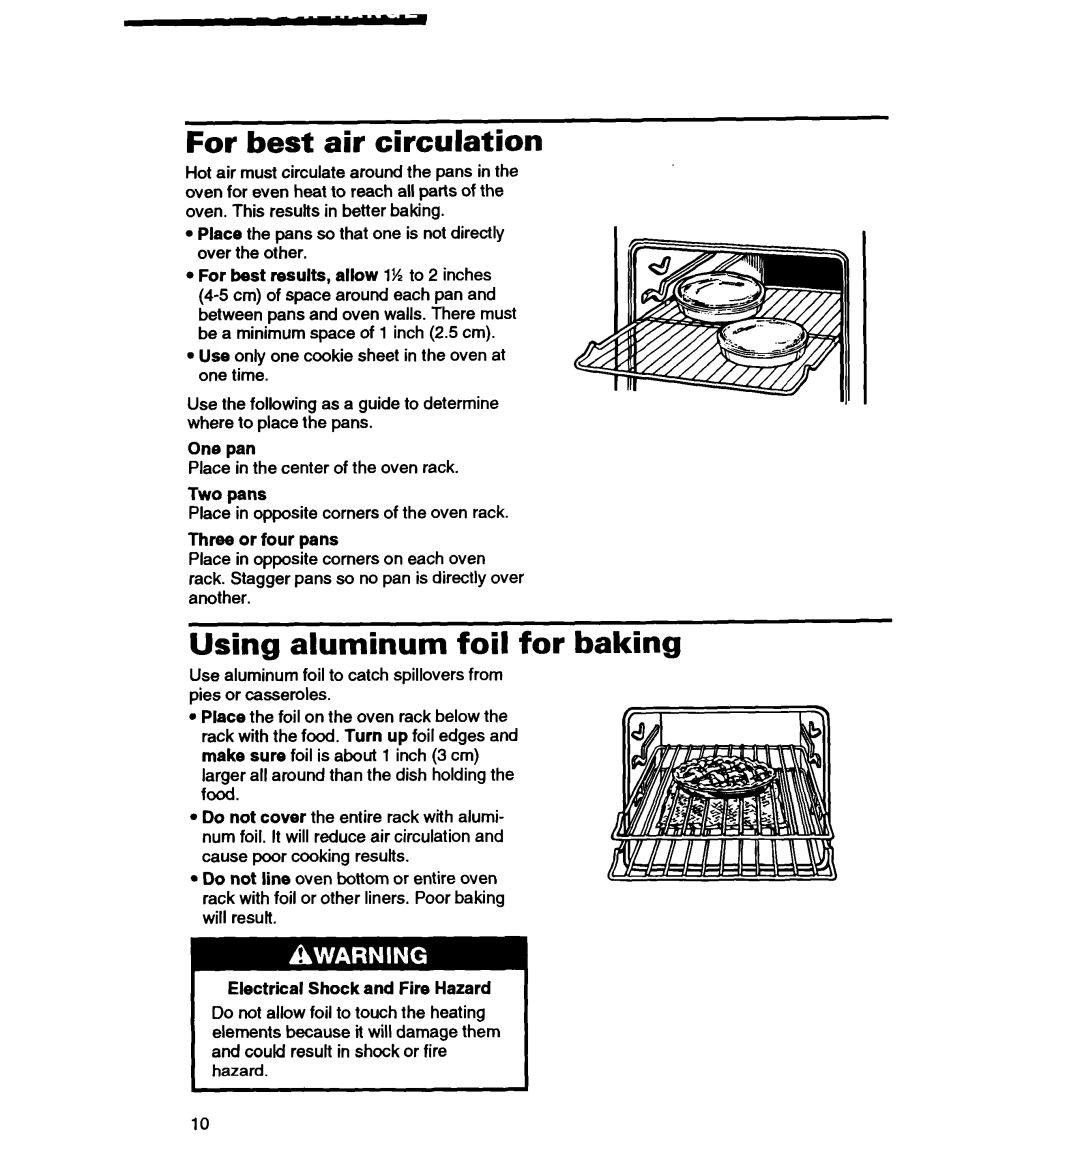 Whirlpool RS363PXY manual For best air circulation, Using aluminum foil for baking, One pan, Two pans, Three or four pans 